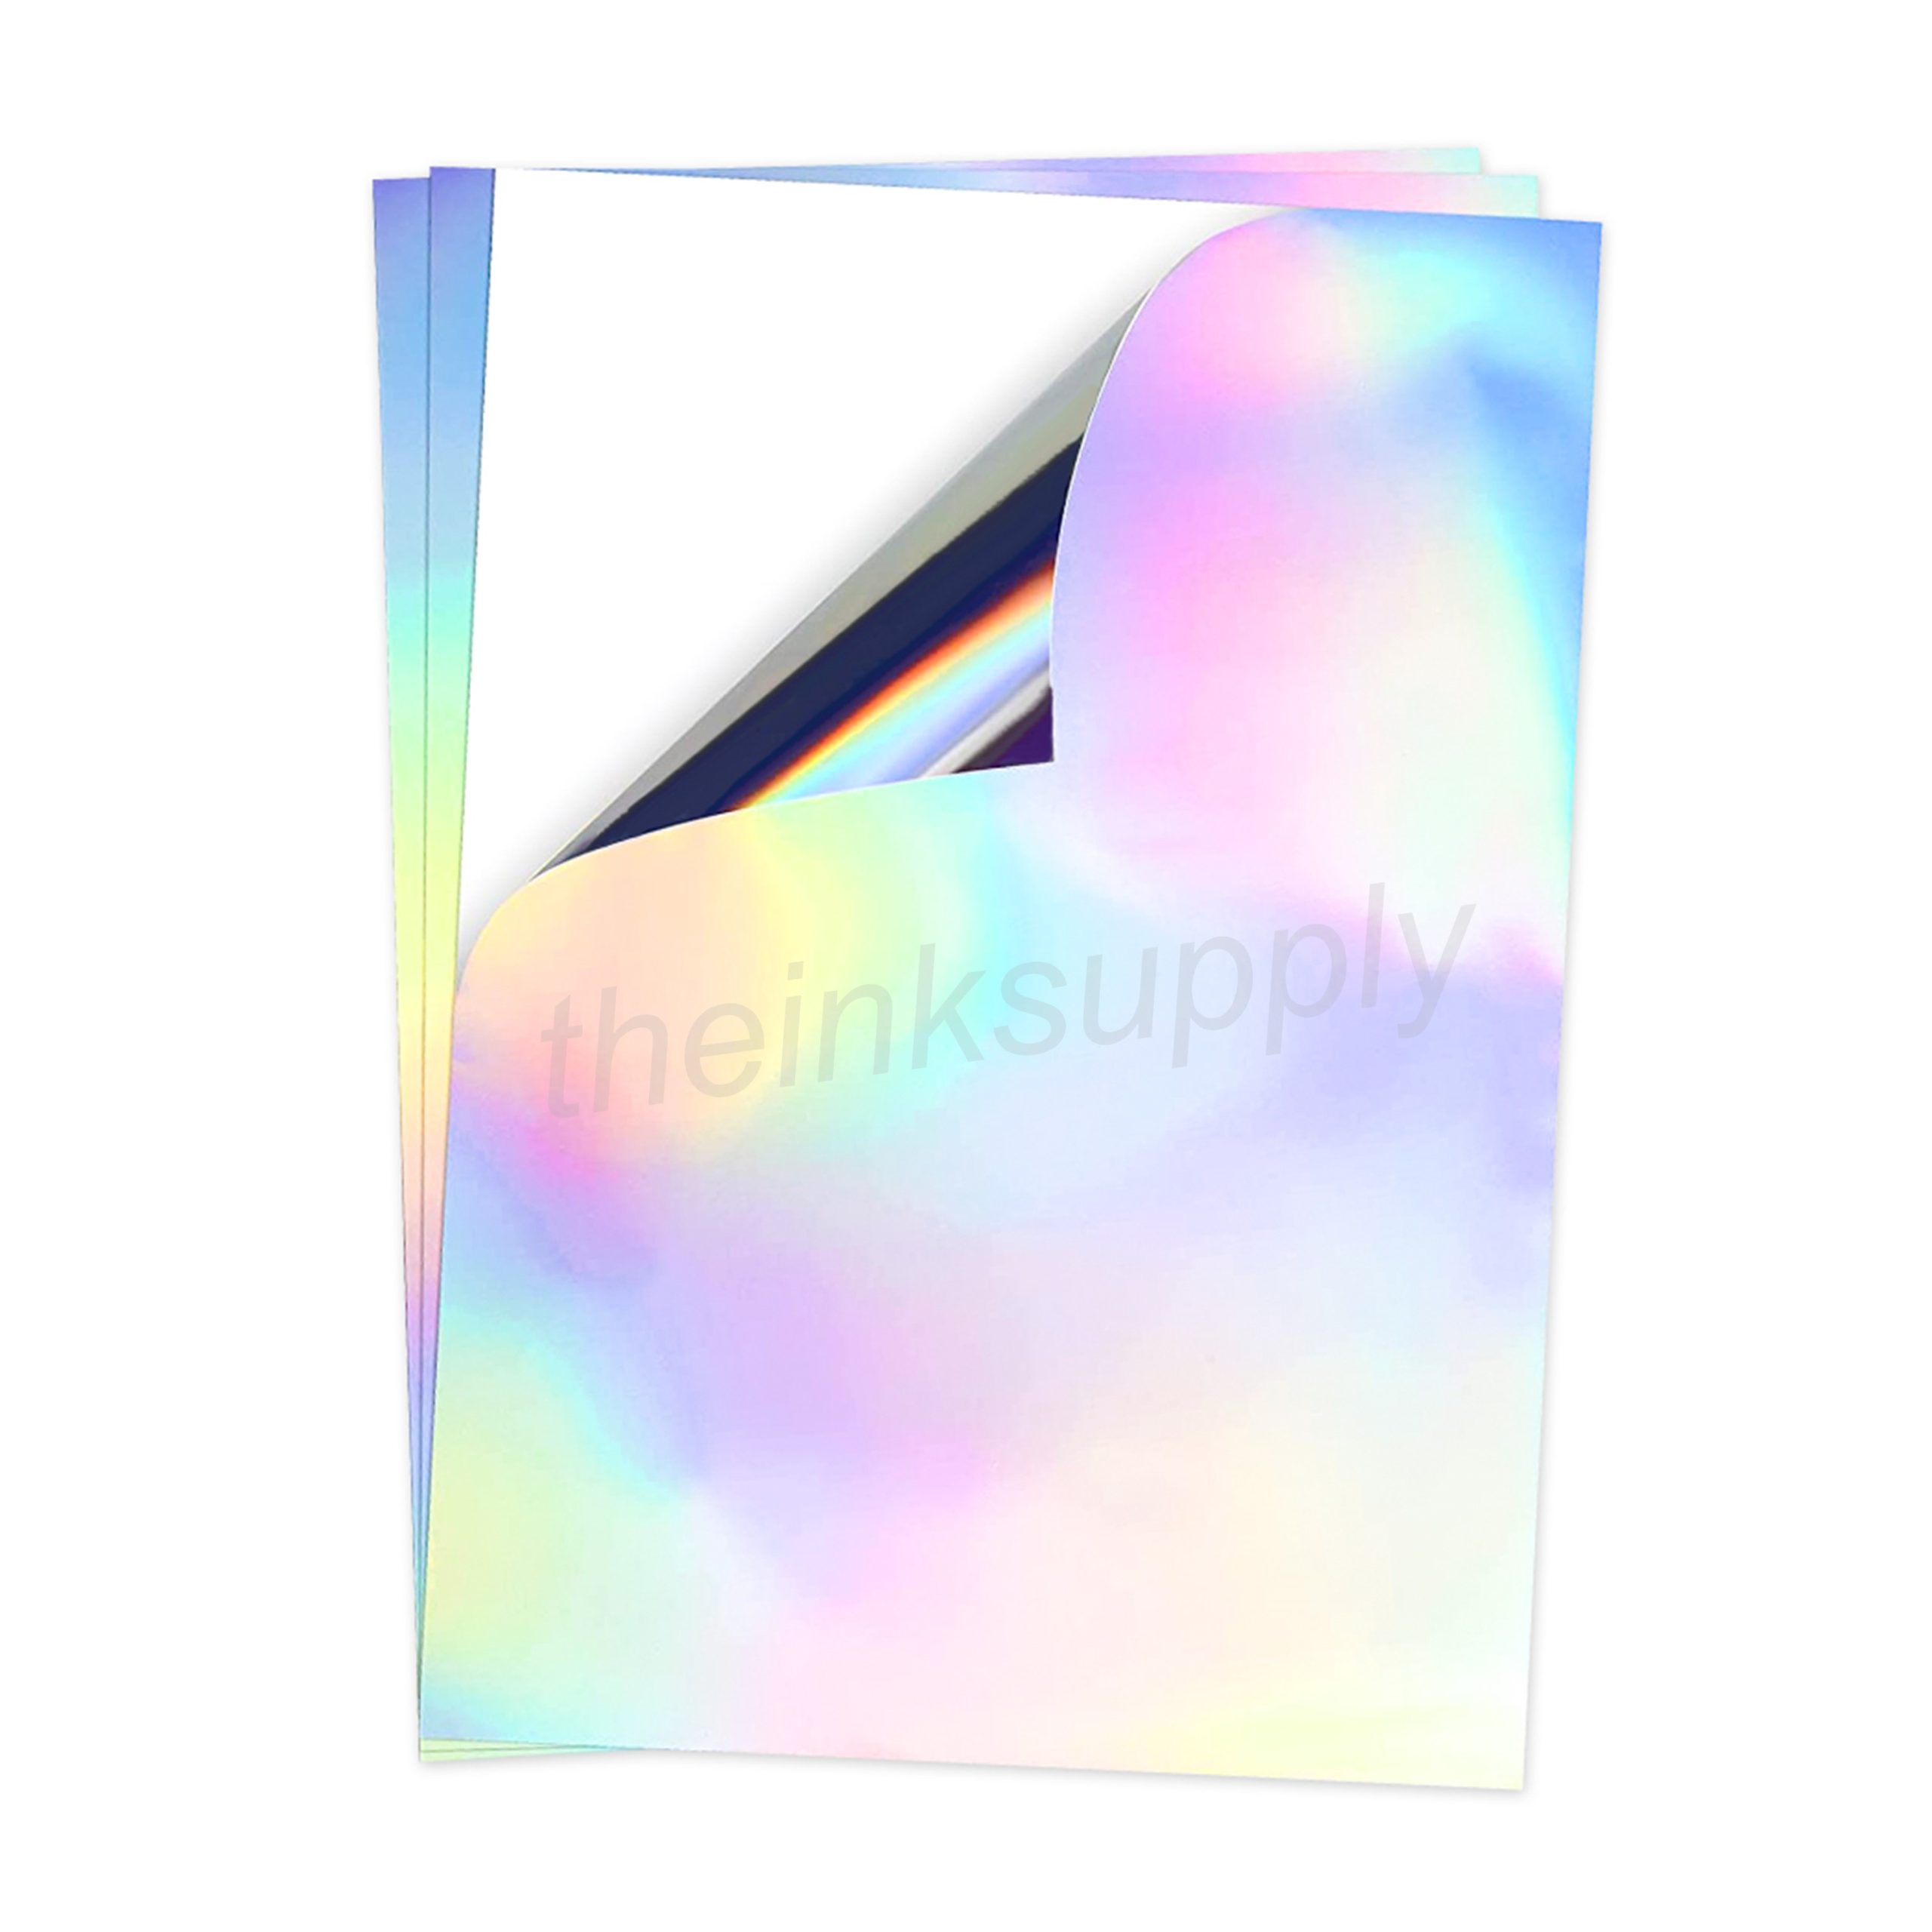 A4 Waterproof Sticker Label Sheets Holographic Material for Laser Printer